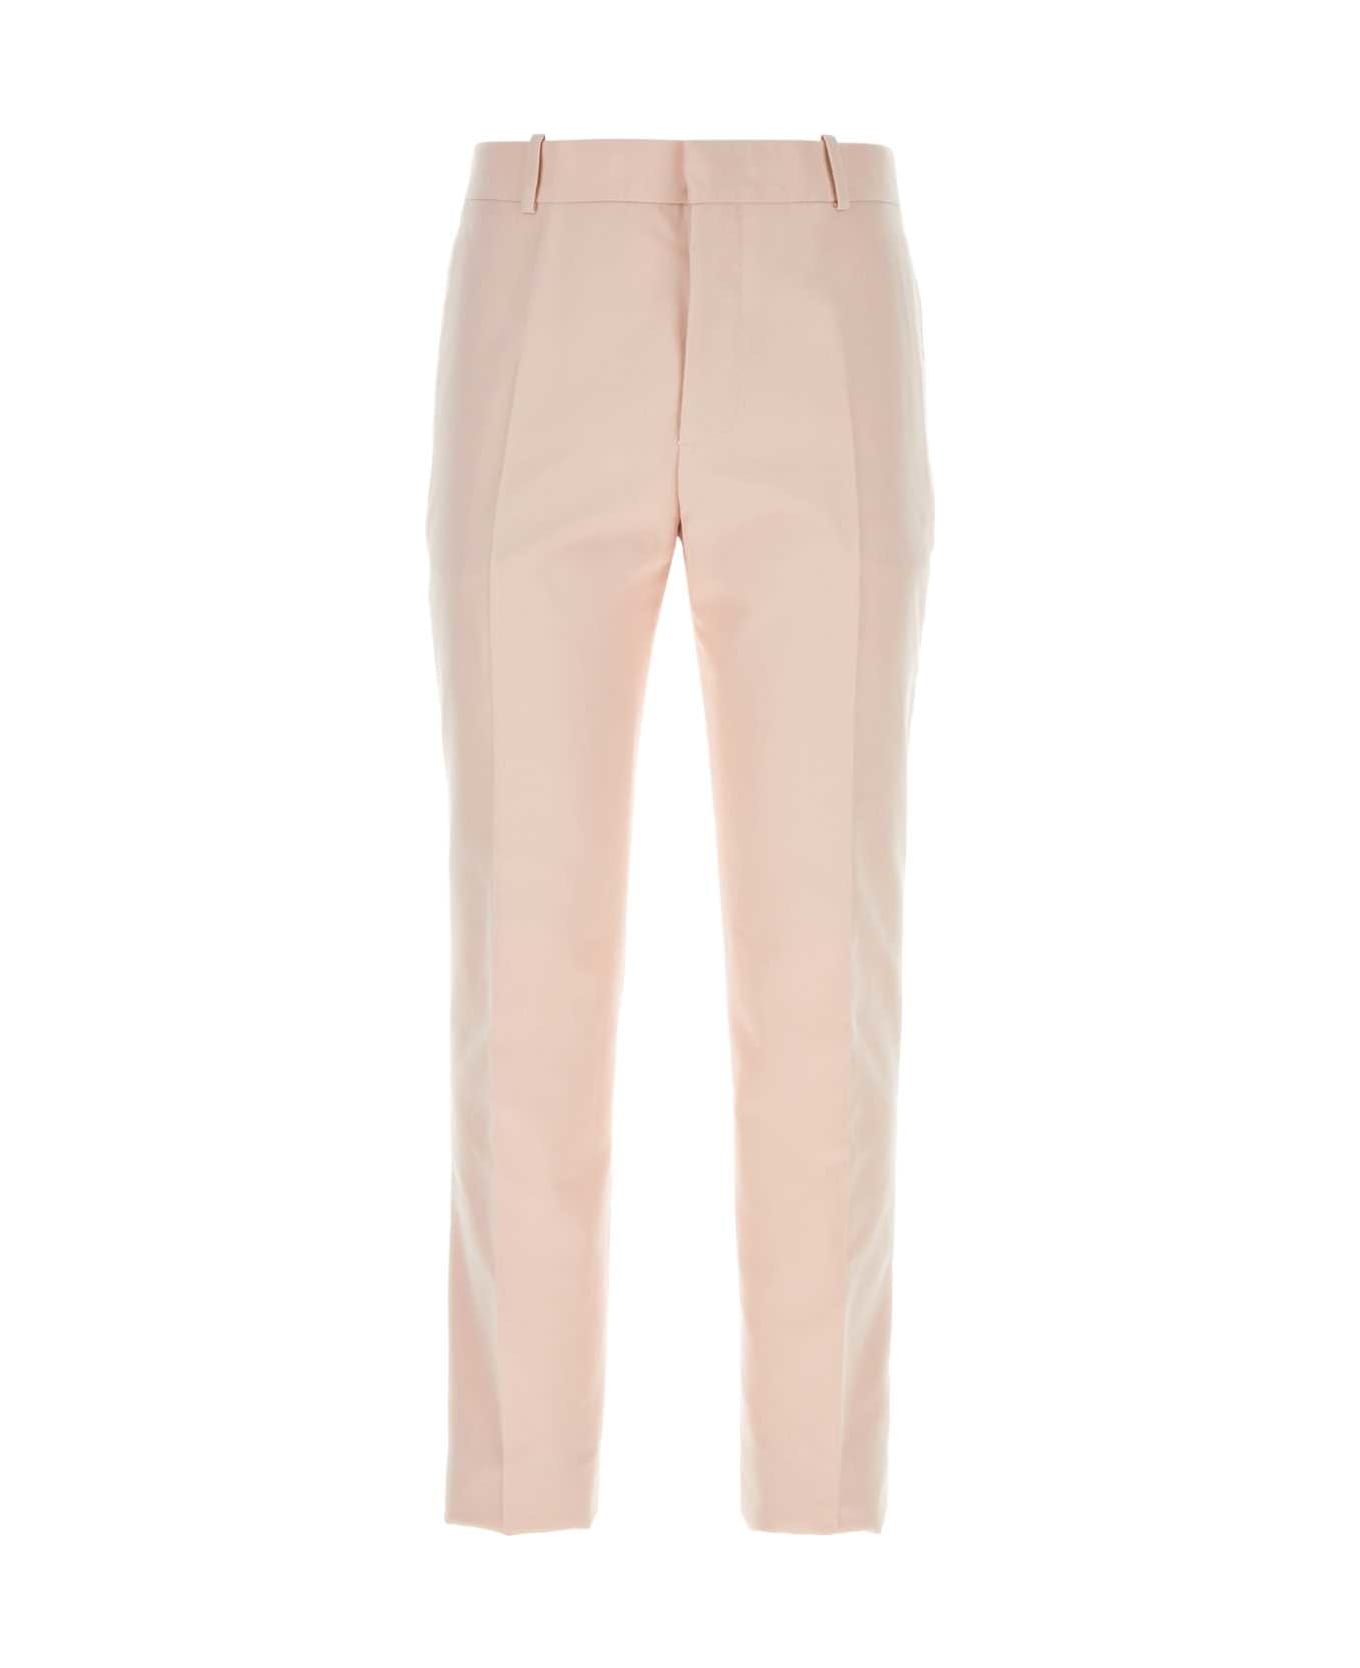 Alexander McQueen Pastel Pink Twill Pant - BLOSSOM